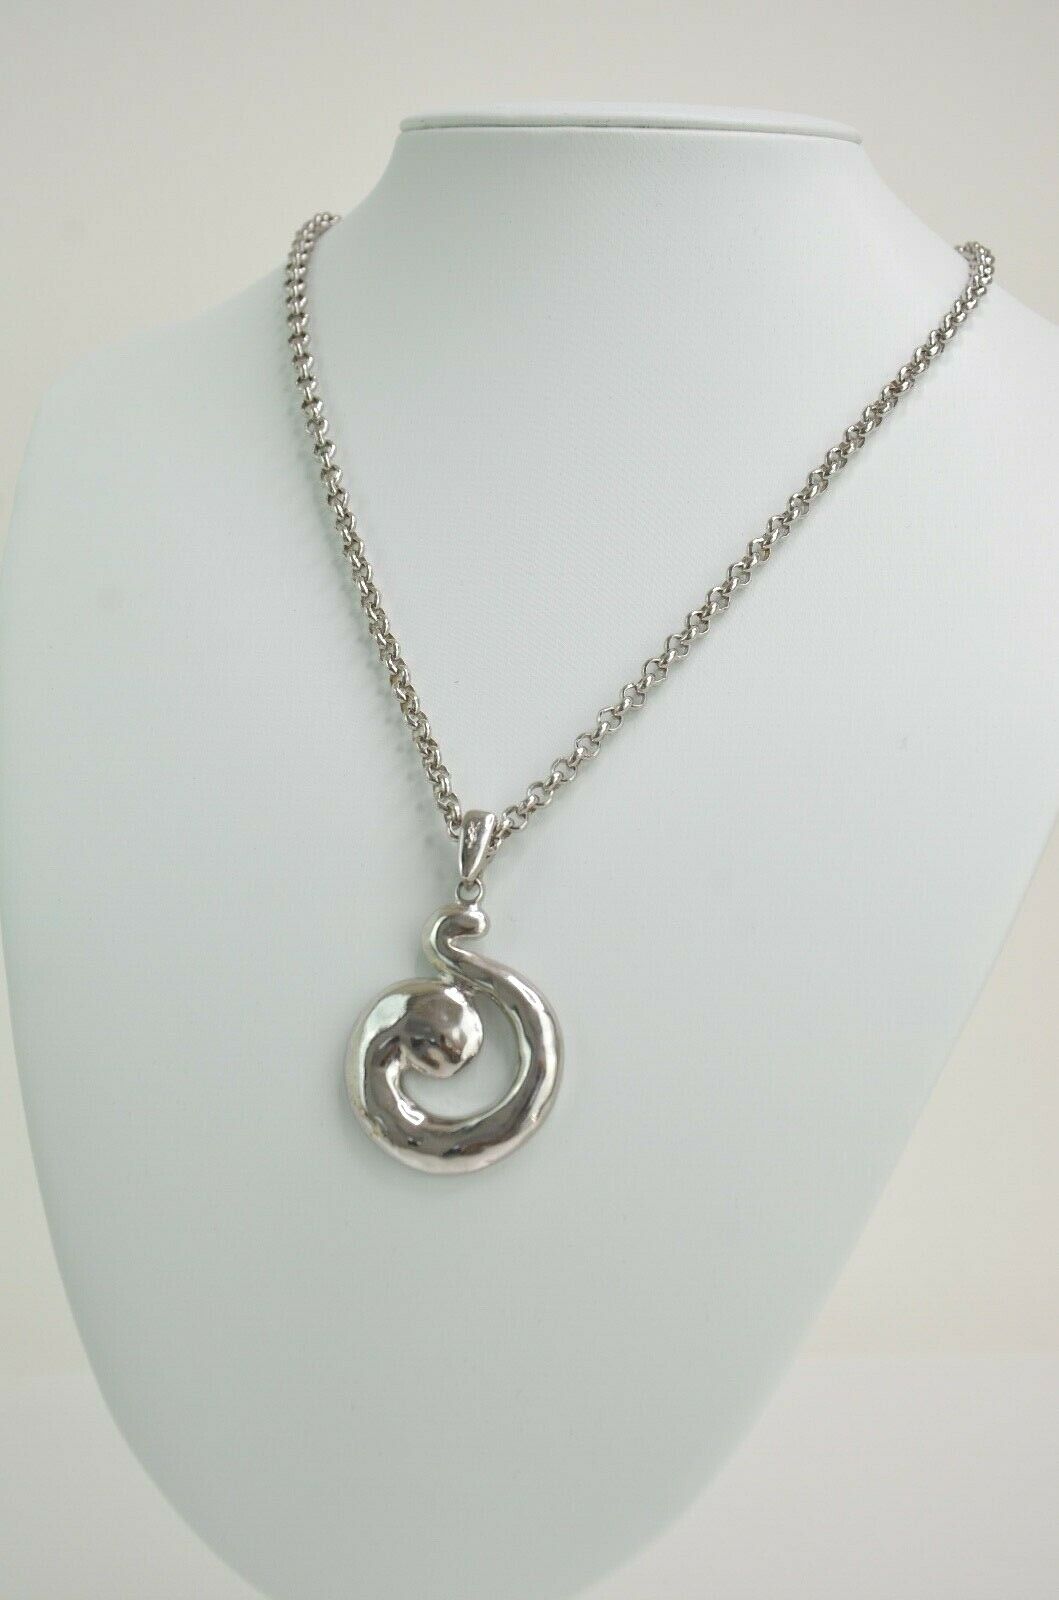 【SOLD OUT】YSL Yves Saint Laurent Silver Tone Coiled Spiral Pendant Vintage Long Necklace